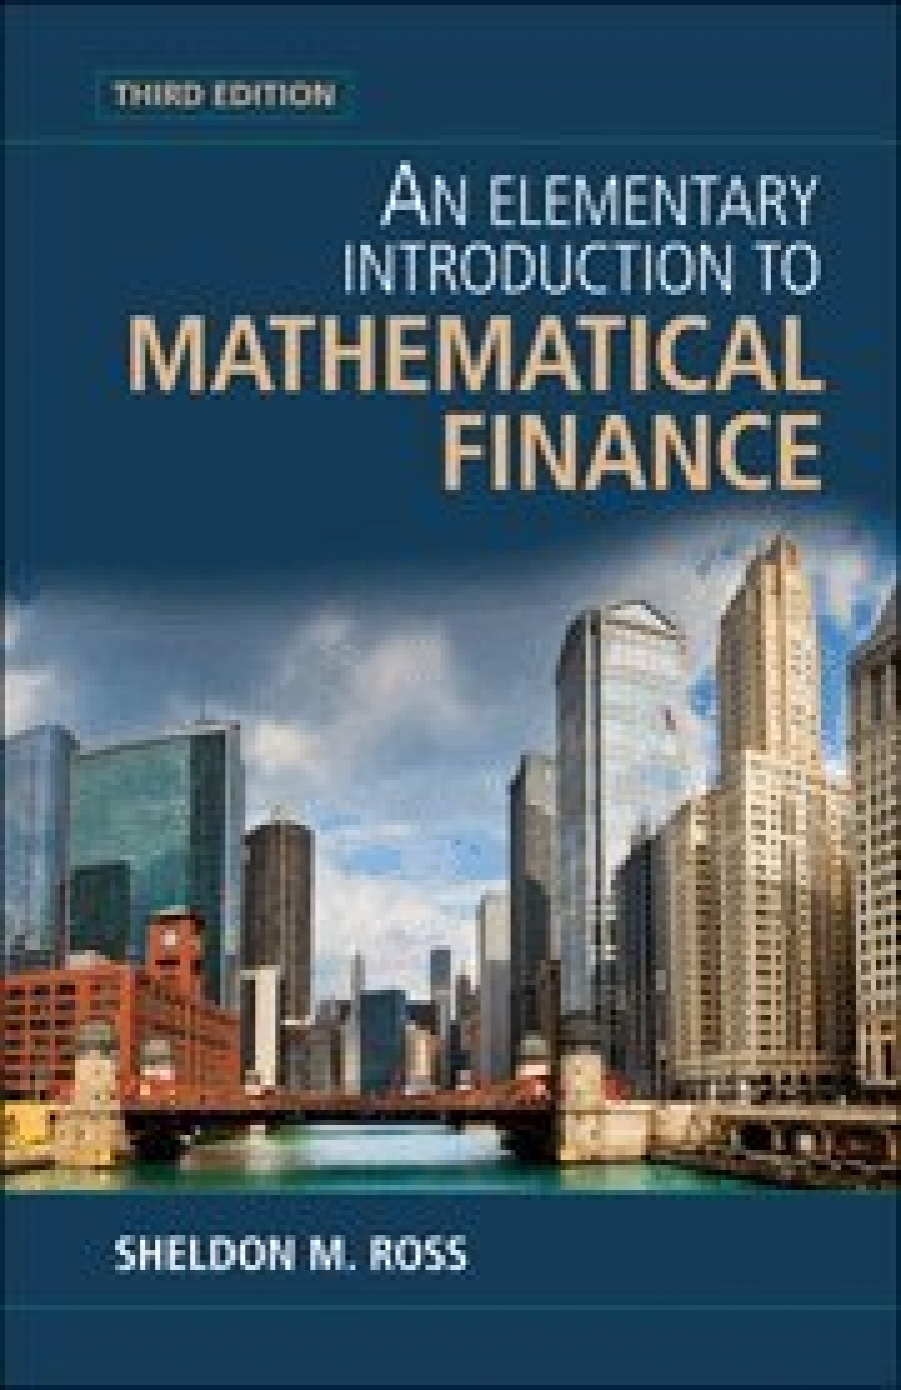 Ross S.M. An Elementary Introduction to Mathematical Finance 